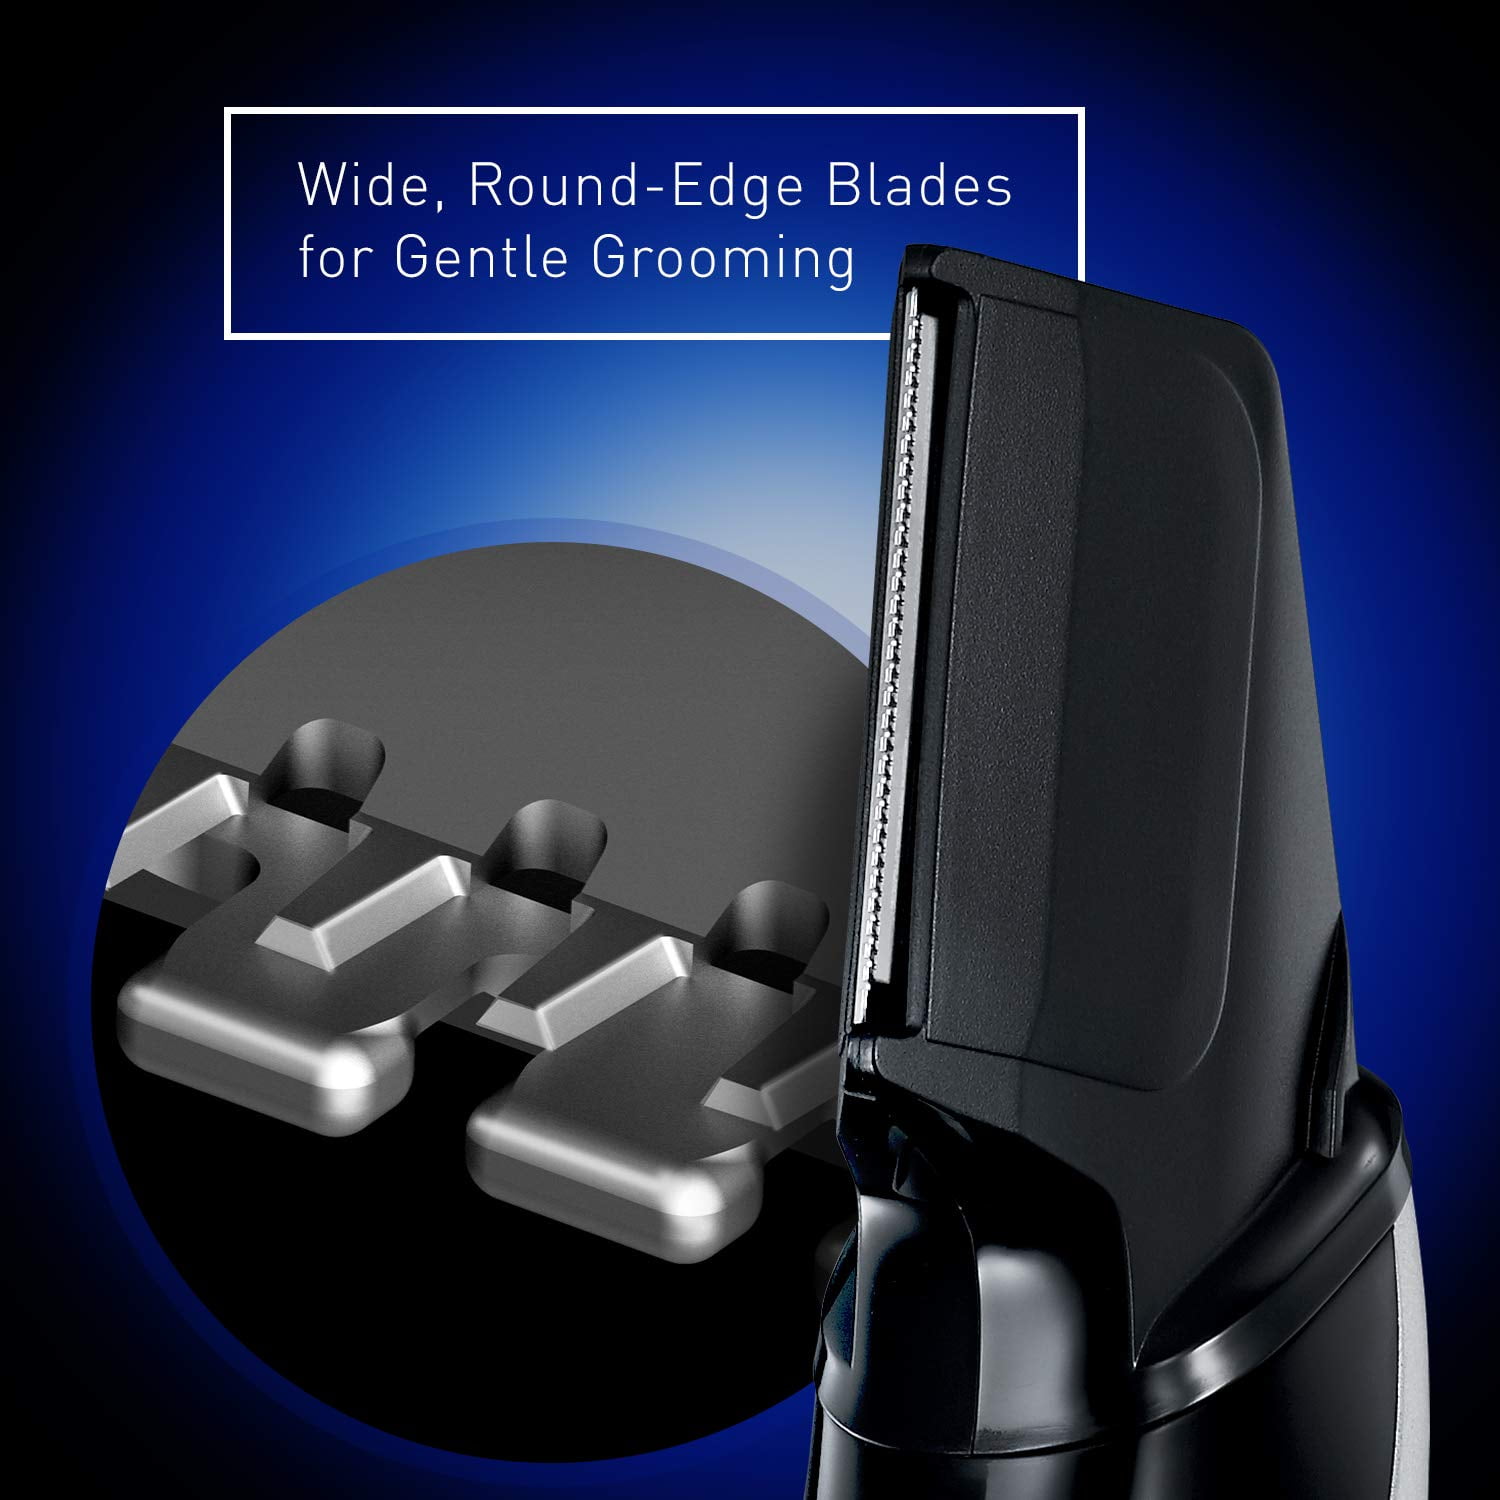 Panasonic Electric Body Groomer and Trimmer for Men ER-GK60-S, Cordless,  Showerproof with 3 Comb Attachments, Washable